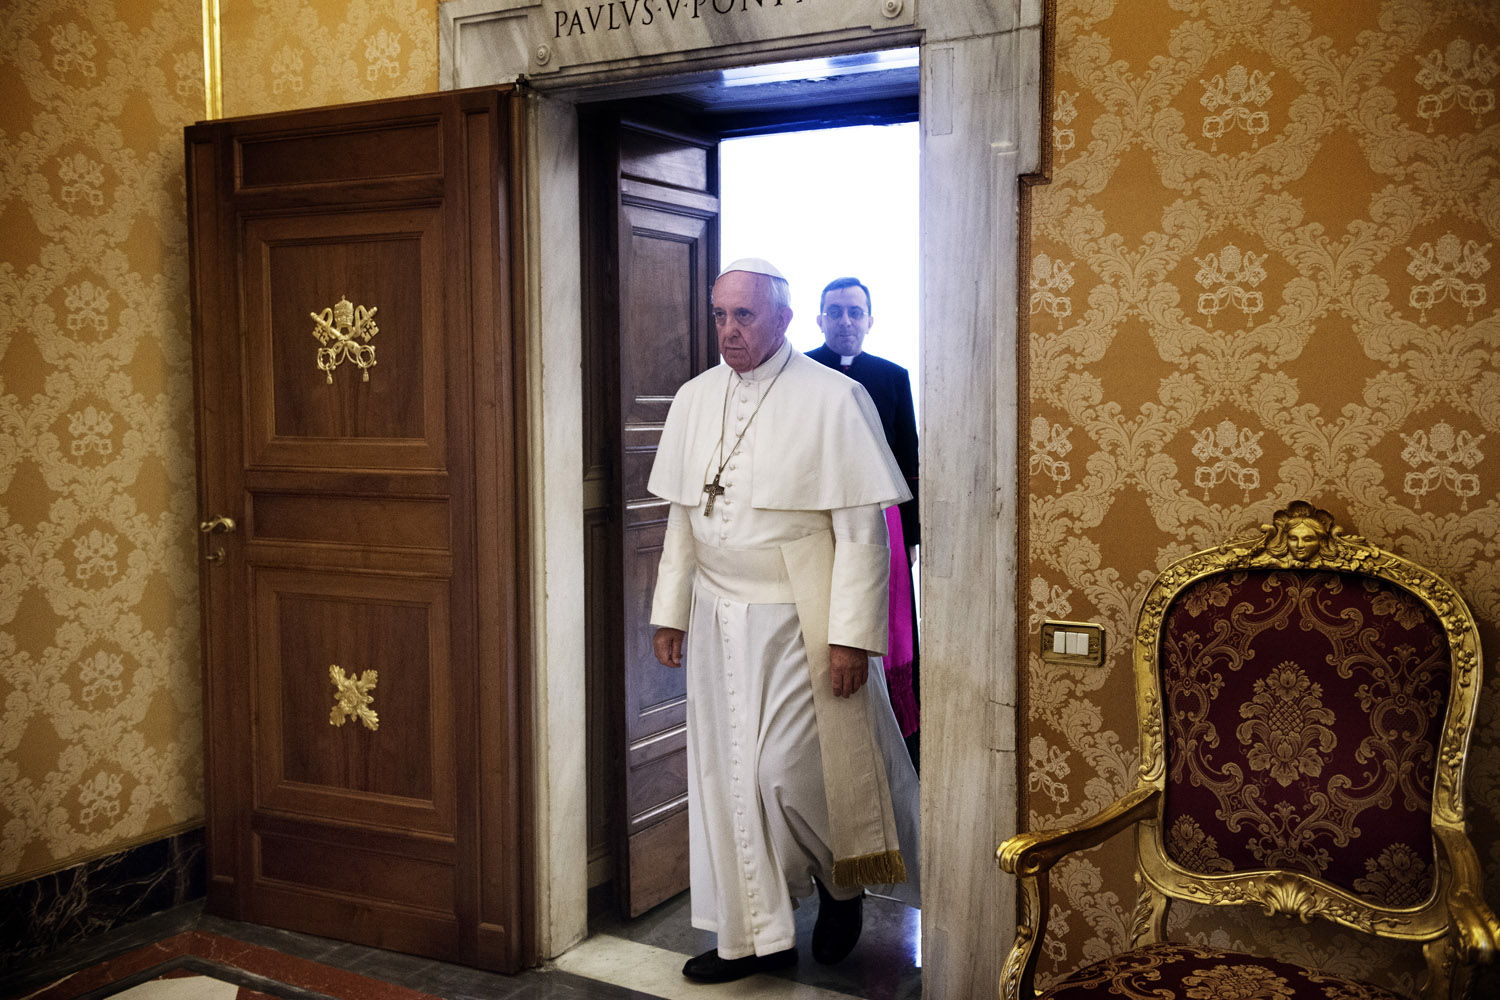 Vatican City, 8 November 2013 –The Holy Father received in audience the president of the Republic of Costa Rica, Laura Chinchilla Miranda.